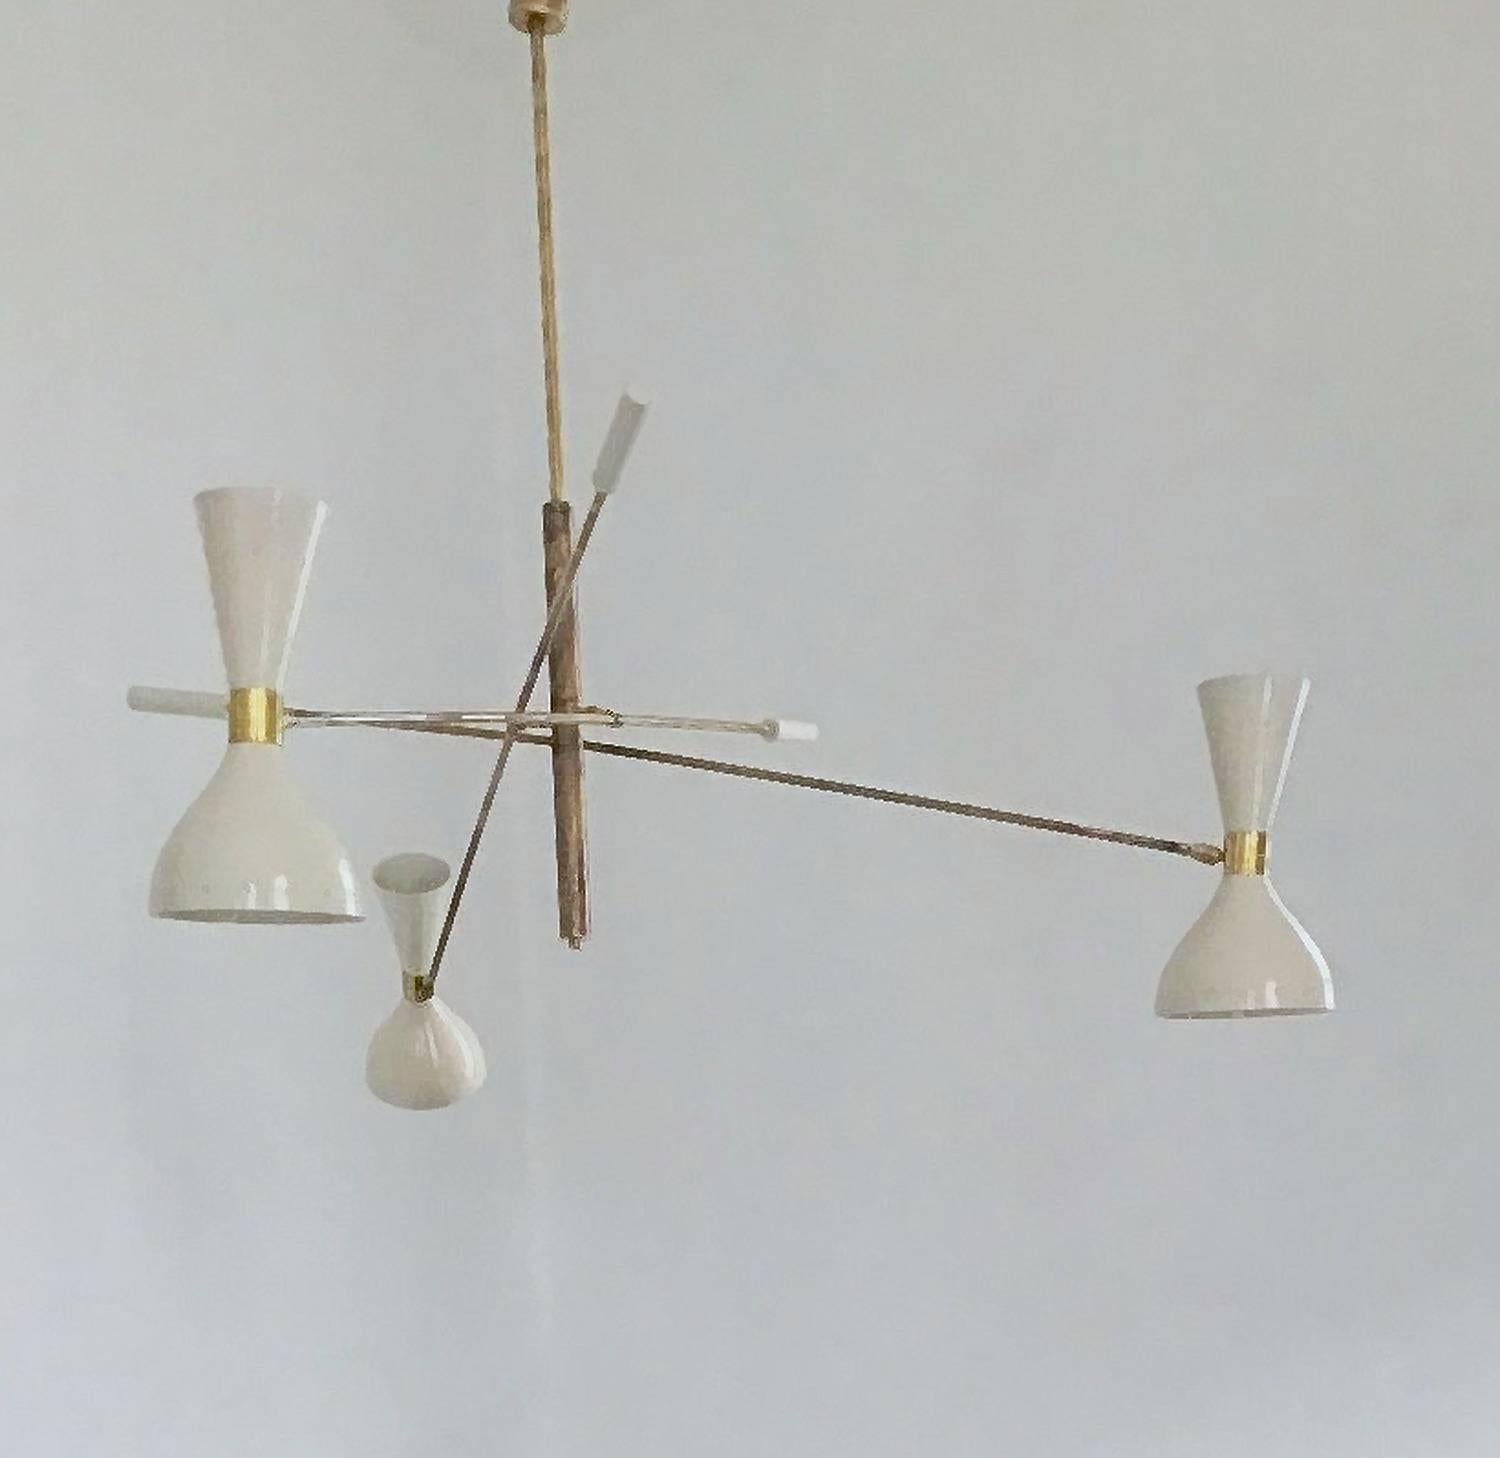 A wonderful interpretation of the Mid-Century iconic three-arm chandelier. Made by a lab specialized in Mid-Century restoration. Owner is a collector himself and connoisseur of the period. This chandelier takes it's inspiration from the triennale